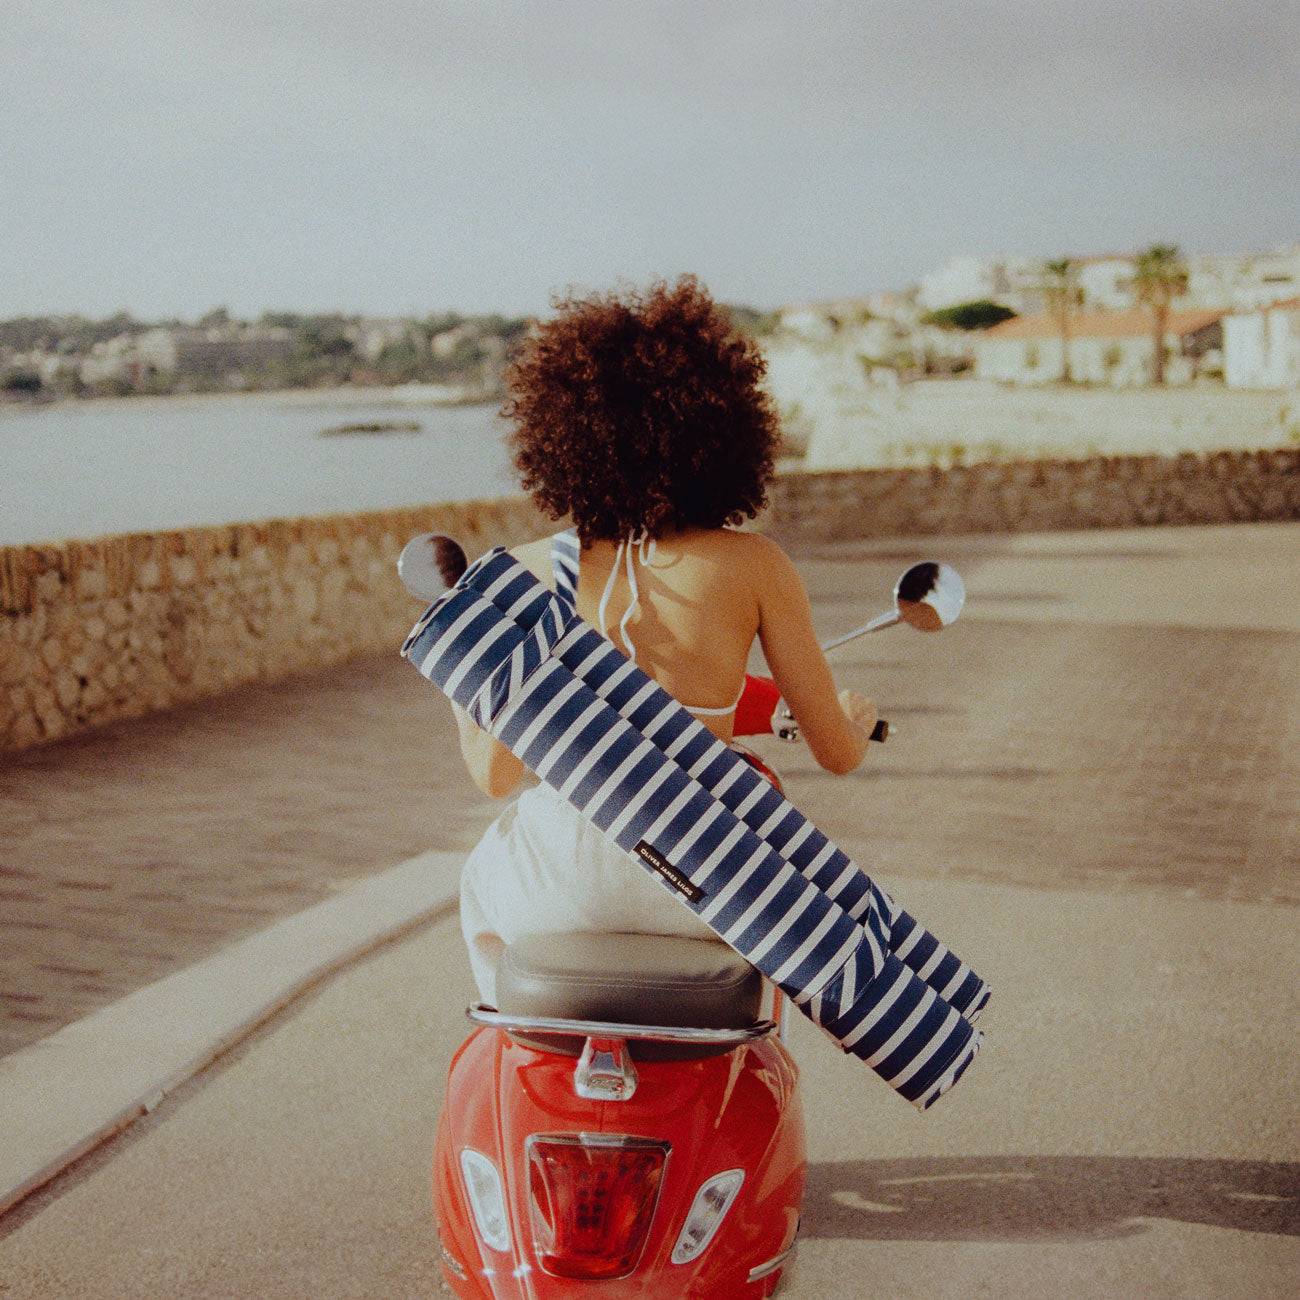 A women on a red moped with the sea in the background and a pool hammock for adults on her back.